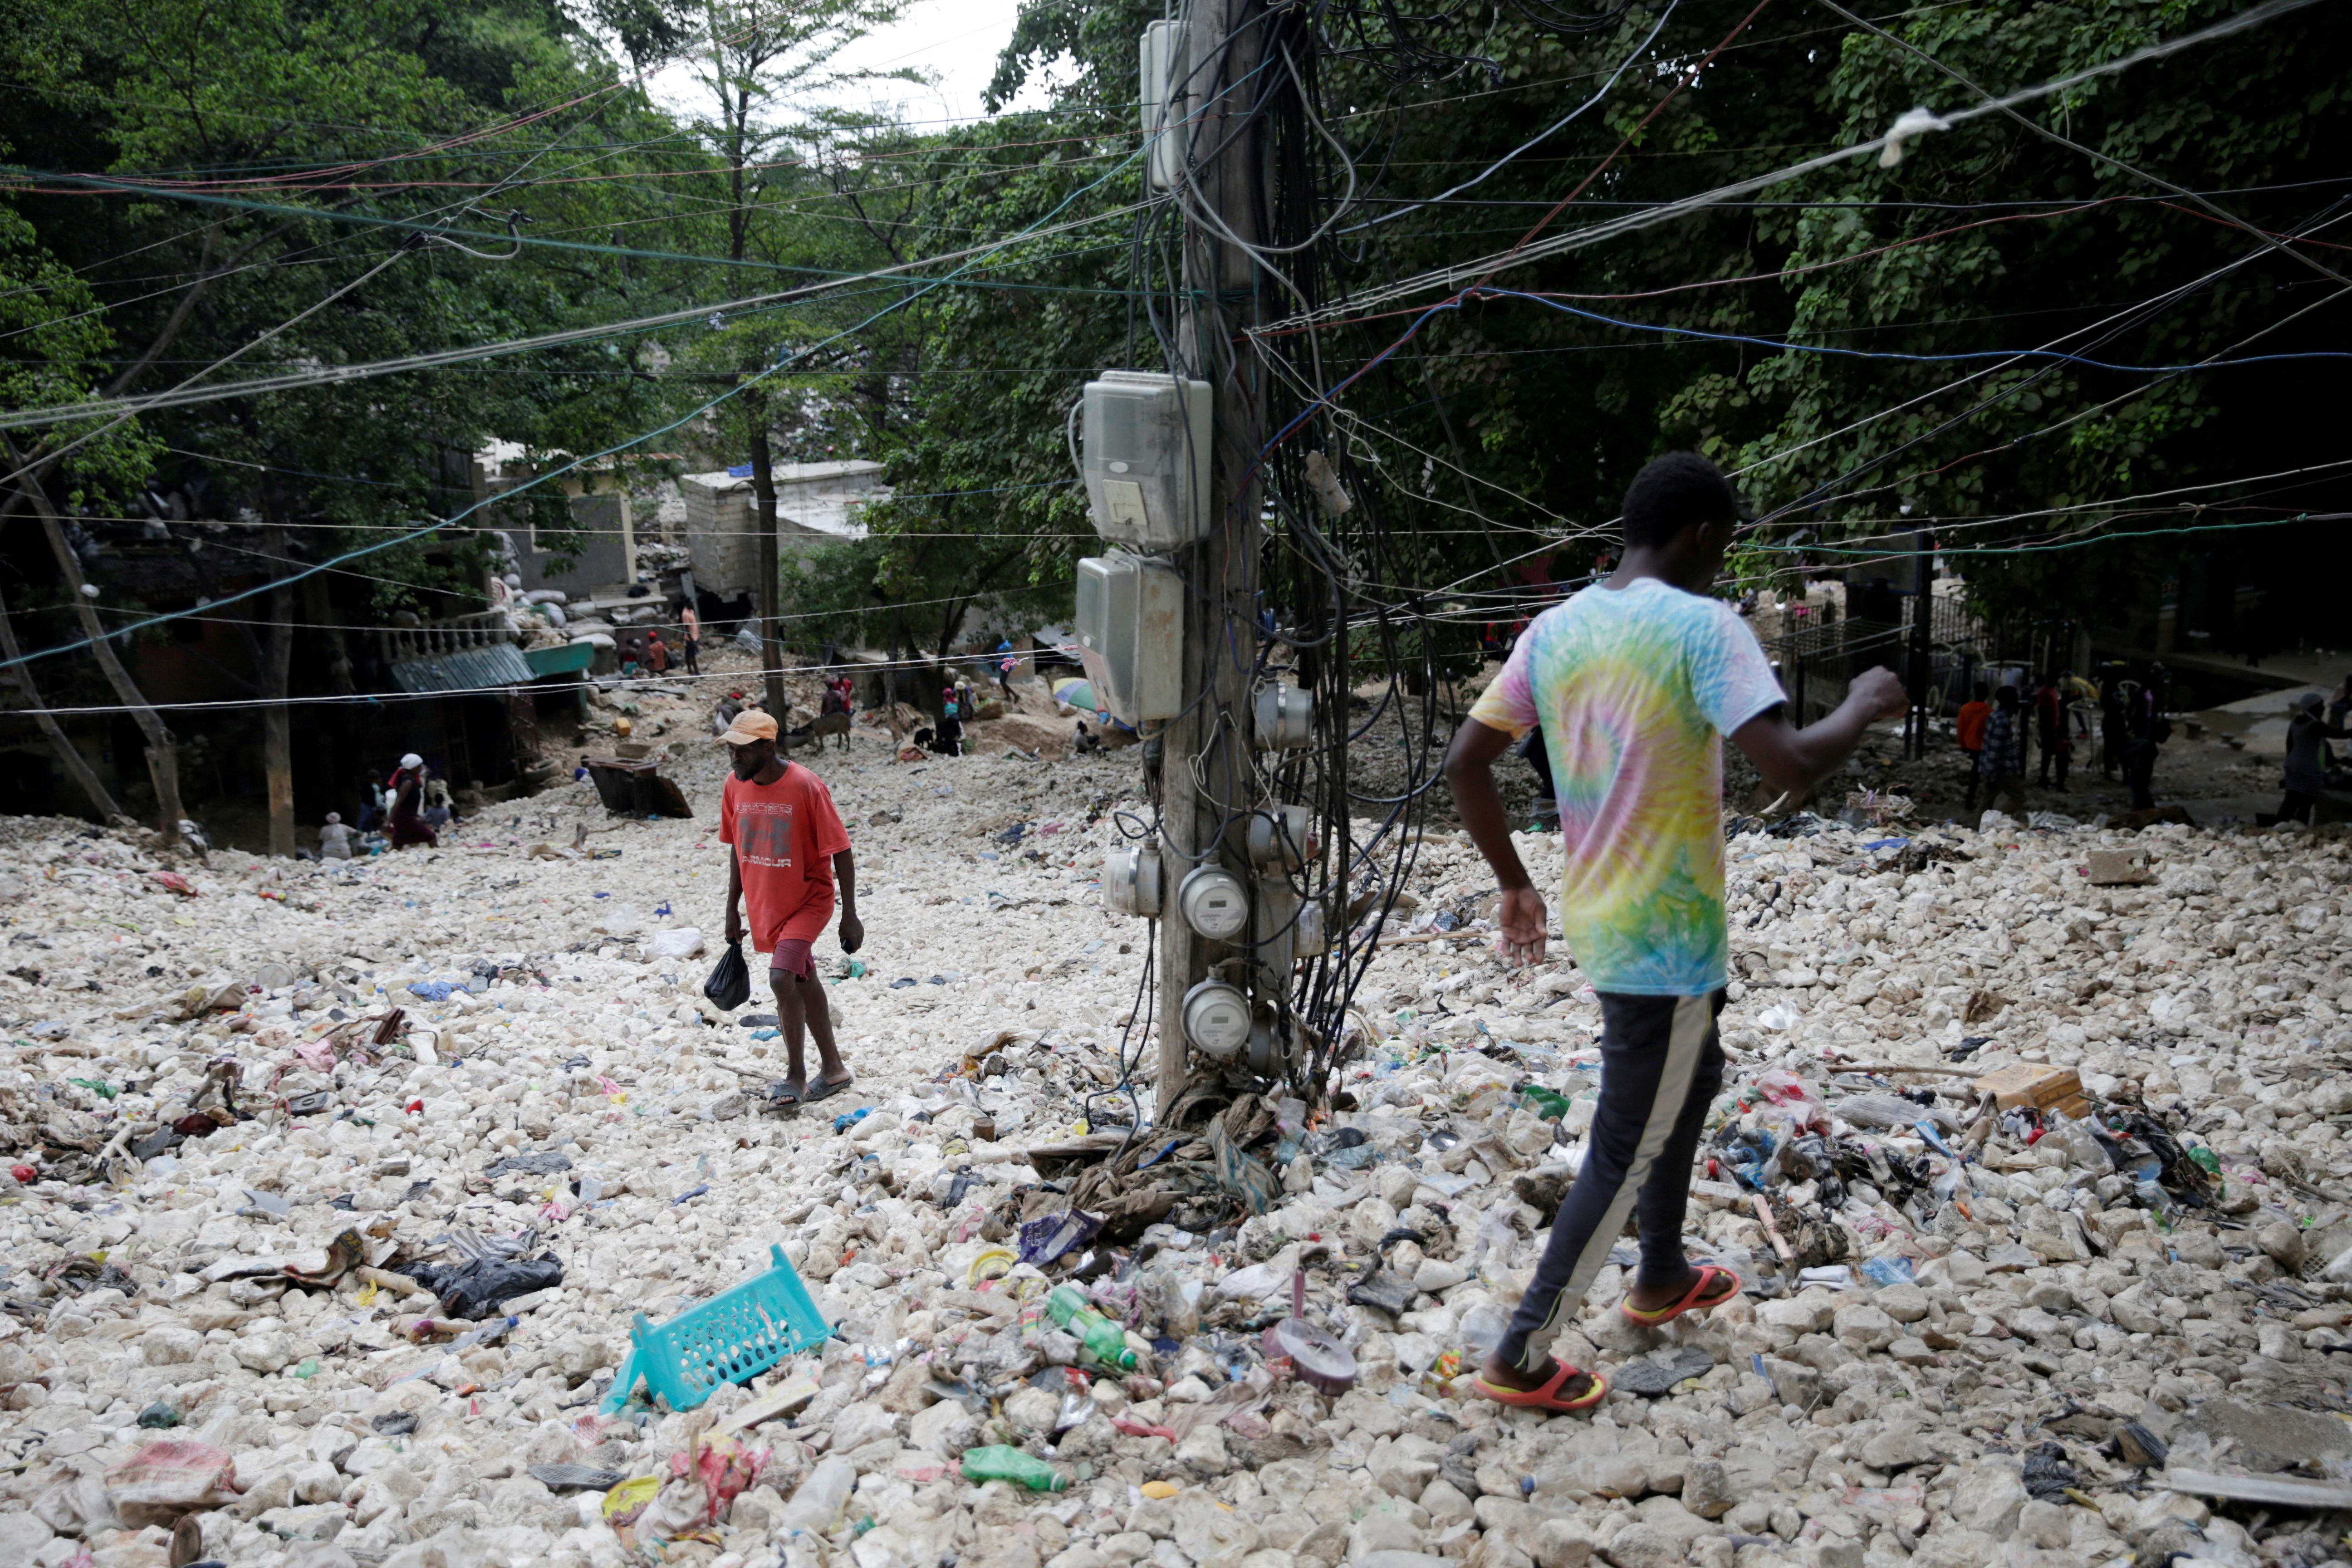 People walk along an area affected by the passage of Tropical Storm Laura, in Port-au-Prince